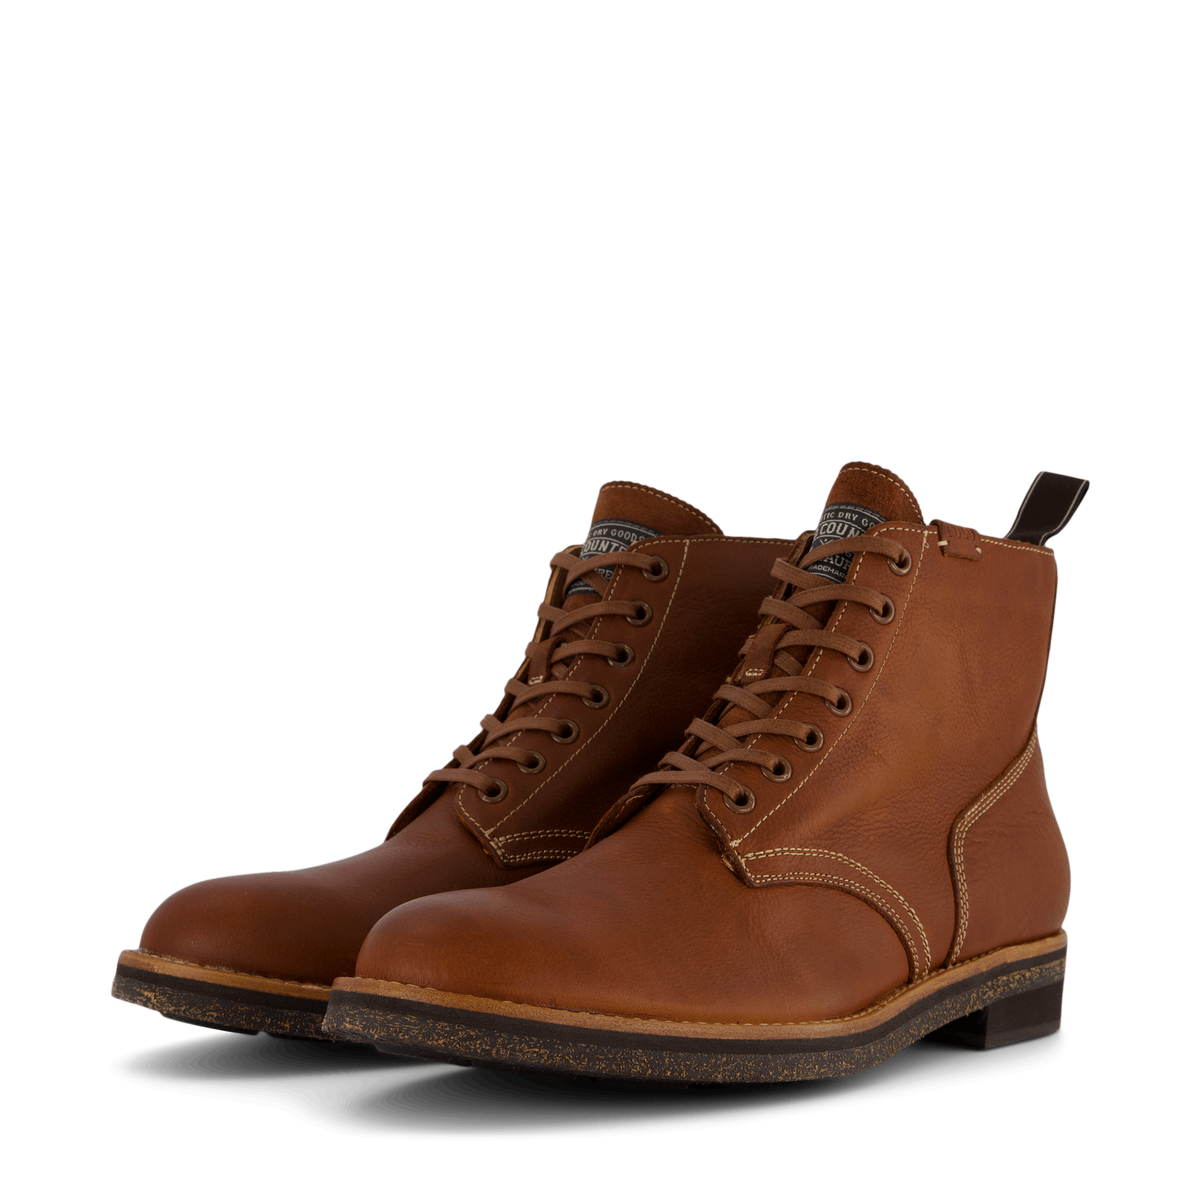 Polo Ralph Lauren Tumbled Leather Boot - Polo Ralph Lauren – Stayhard.com